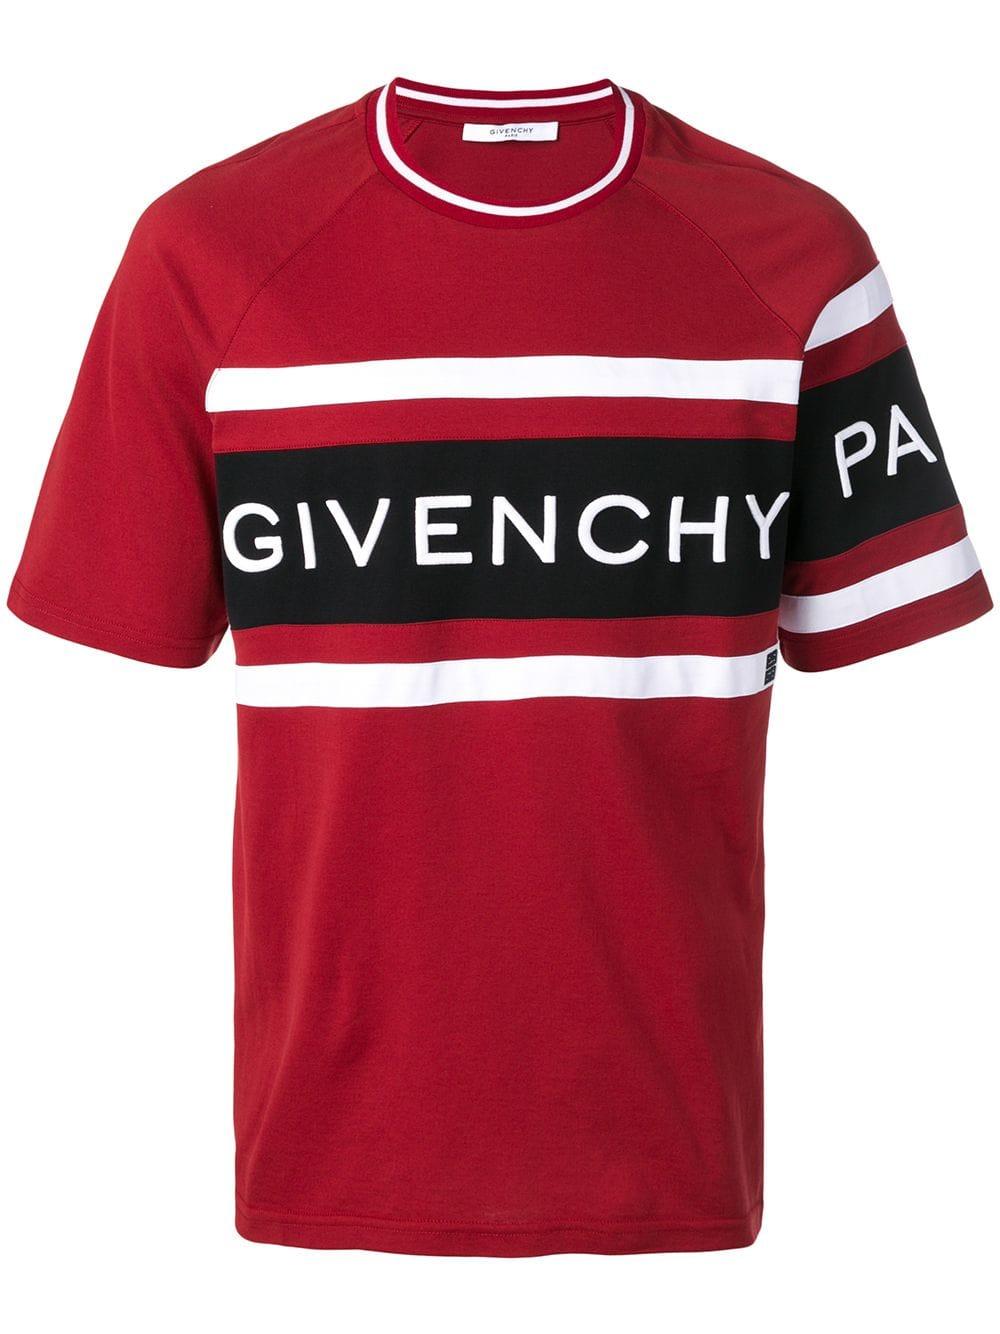 givenchy red t shirt